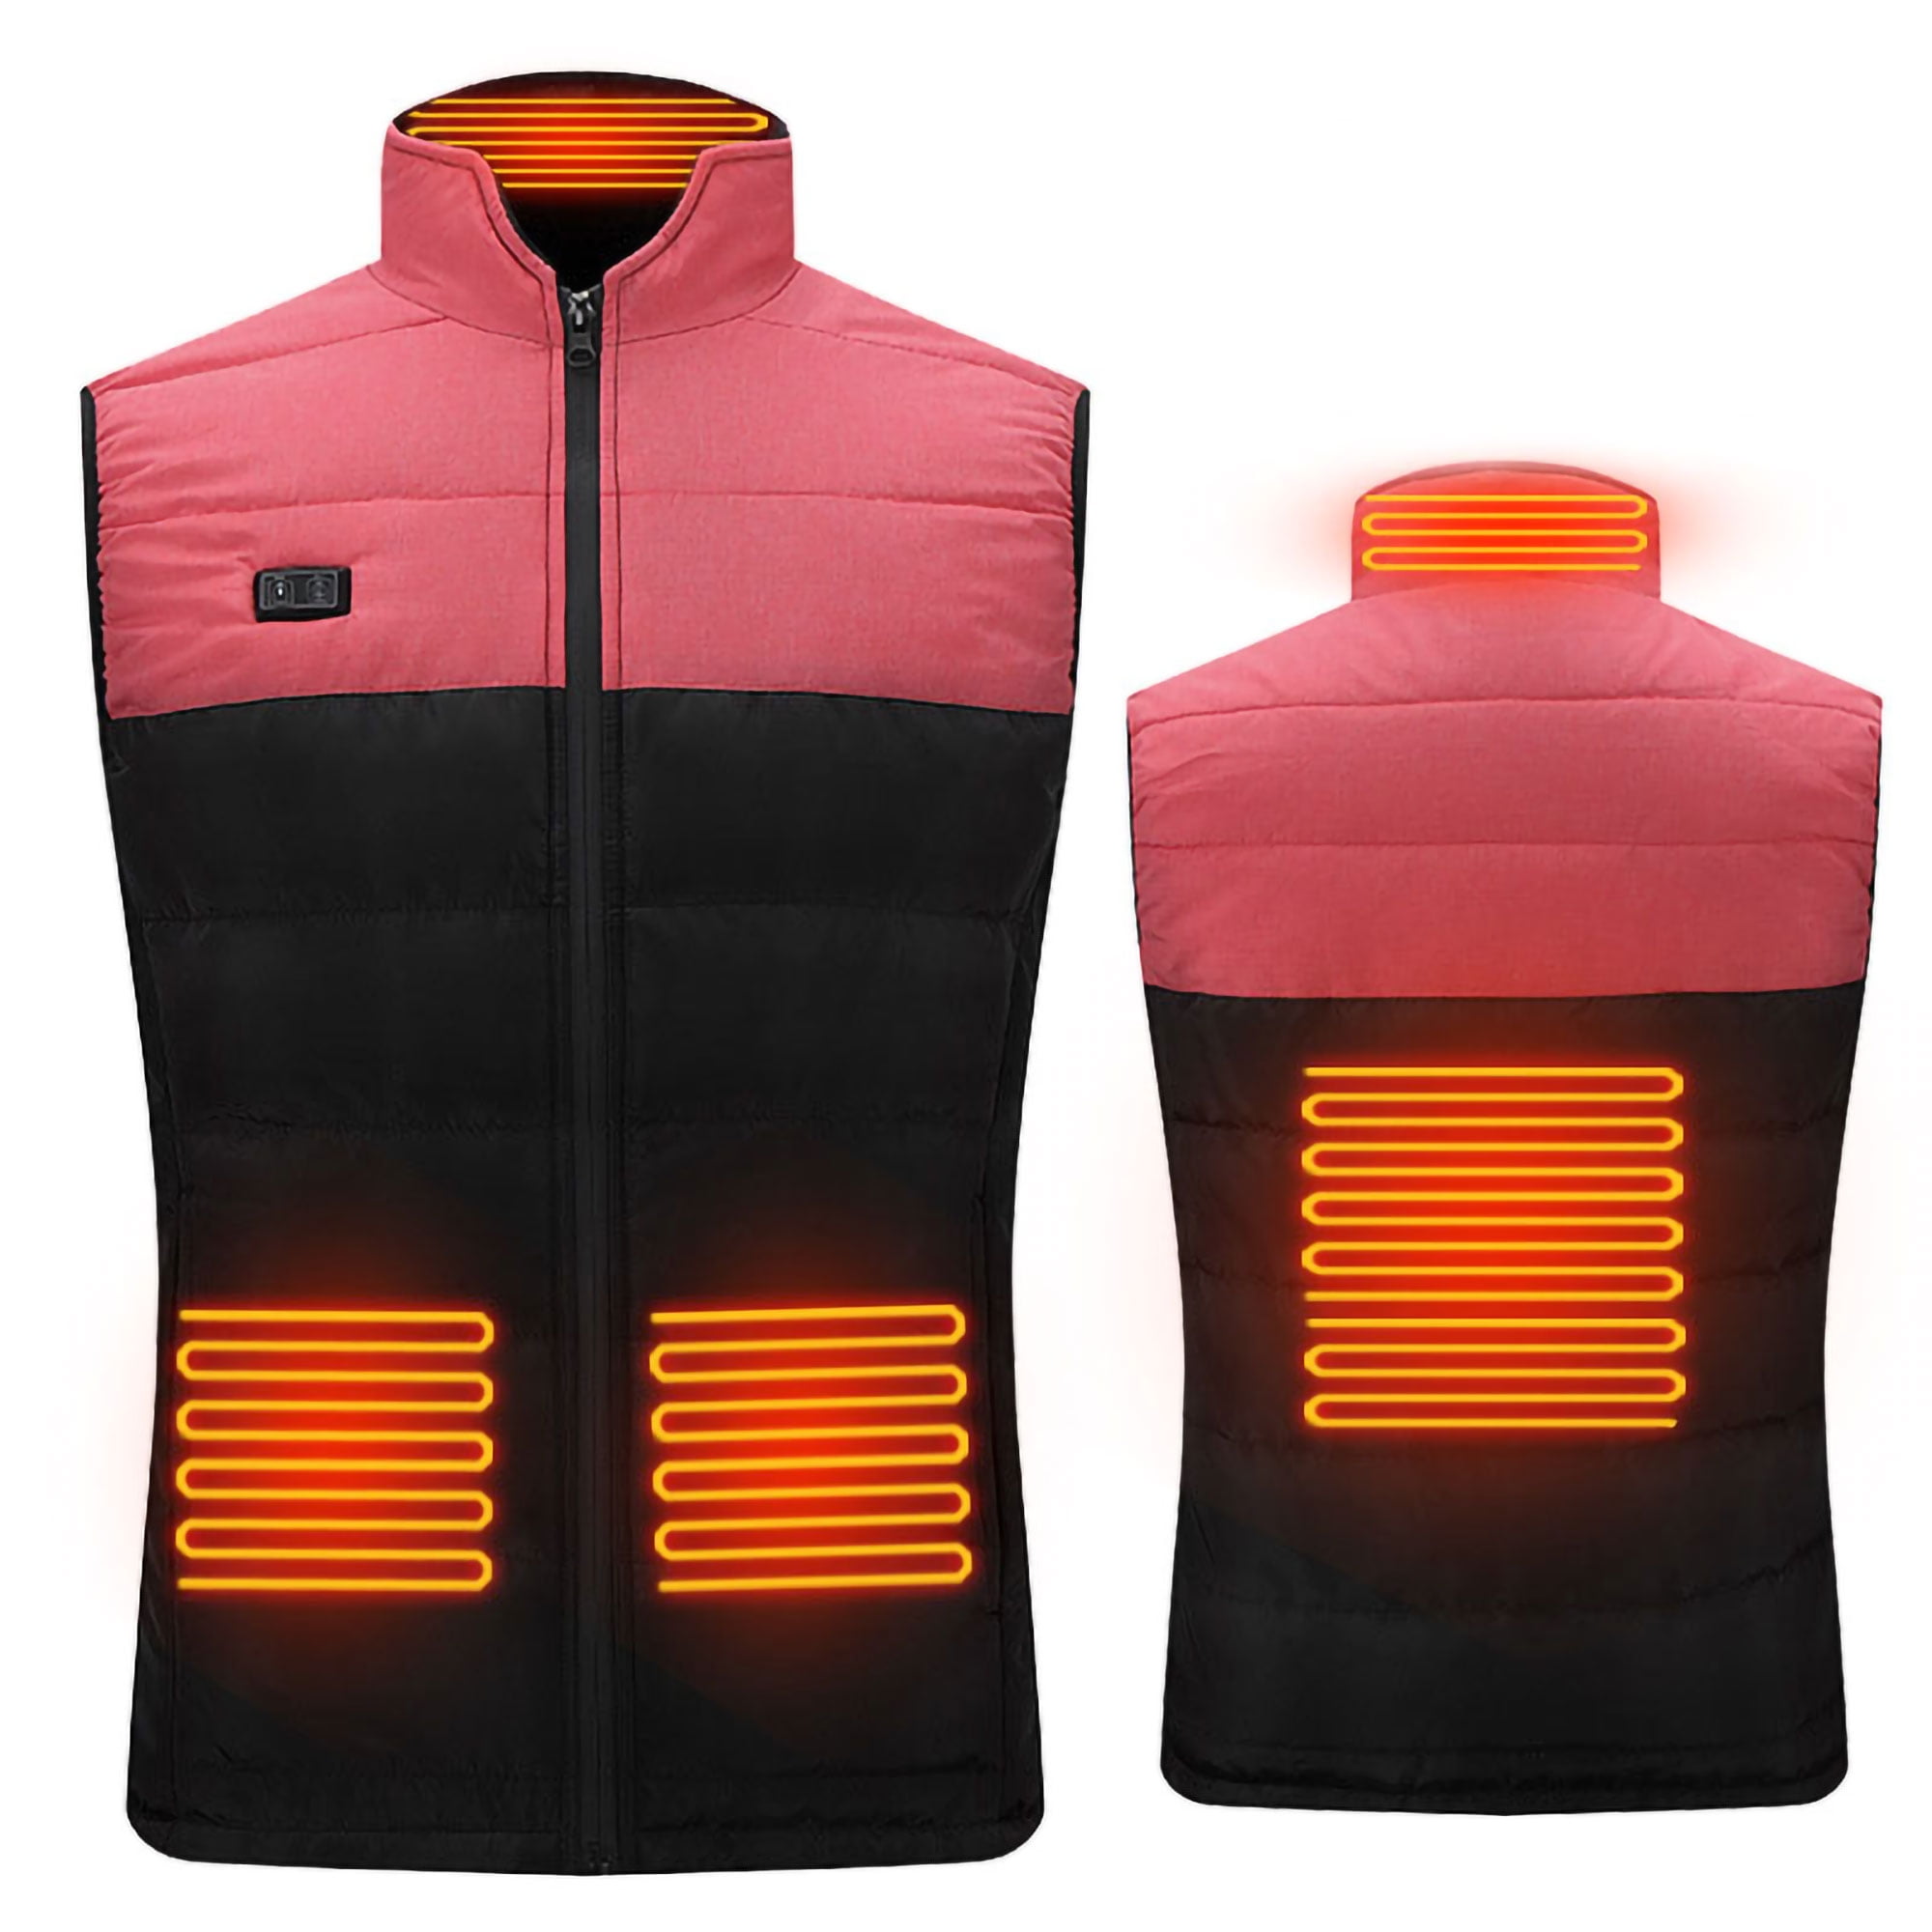 Bulary Heated Vest Outdoor USB Electric Heated Vest Electric Heating Down Jacket Riding Skiing Fishing Clothing Warmer Duvet Heated Clothing for Hiking and Camping Outdoor